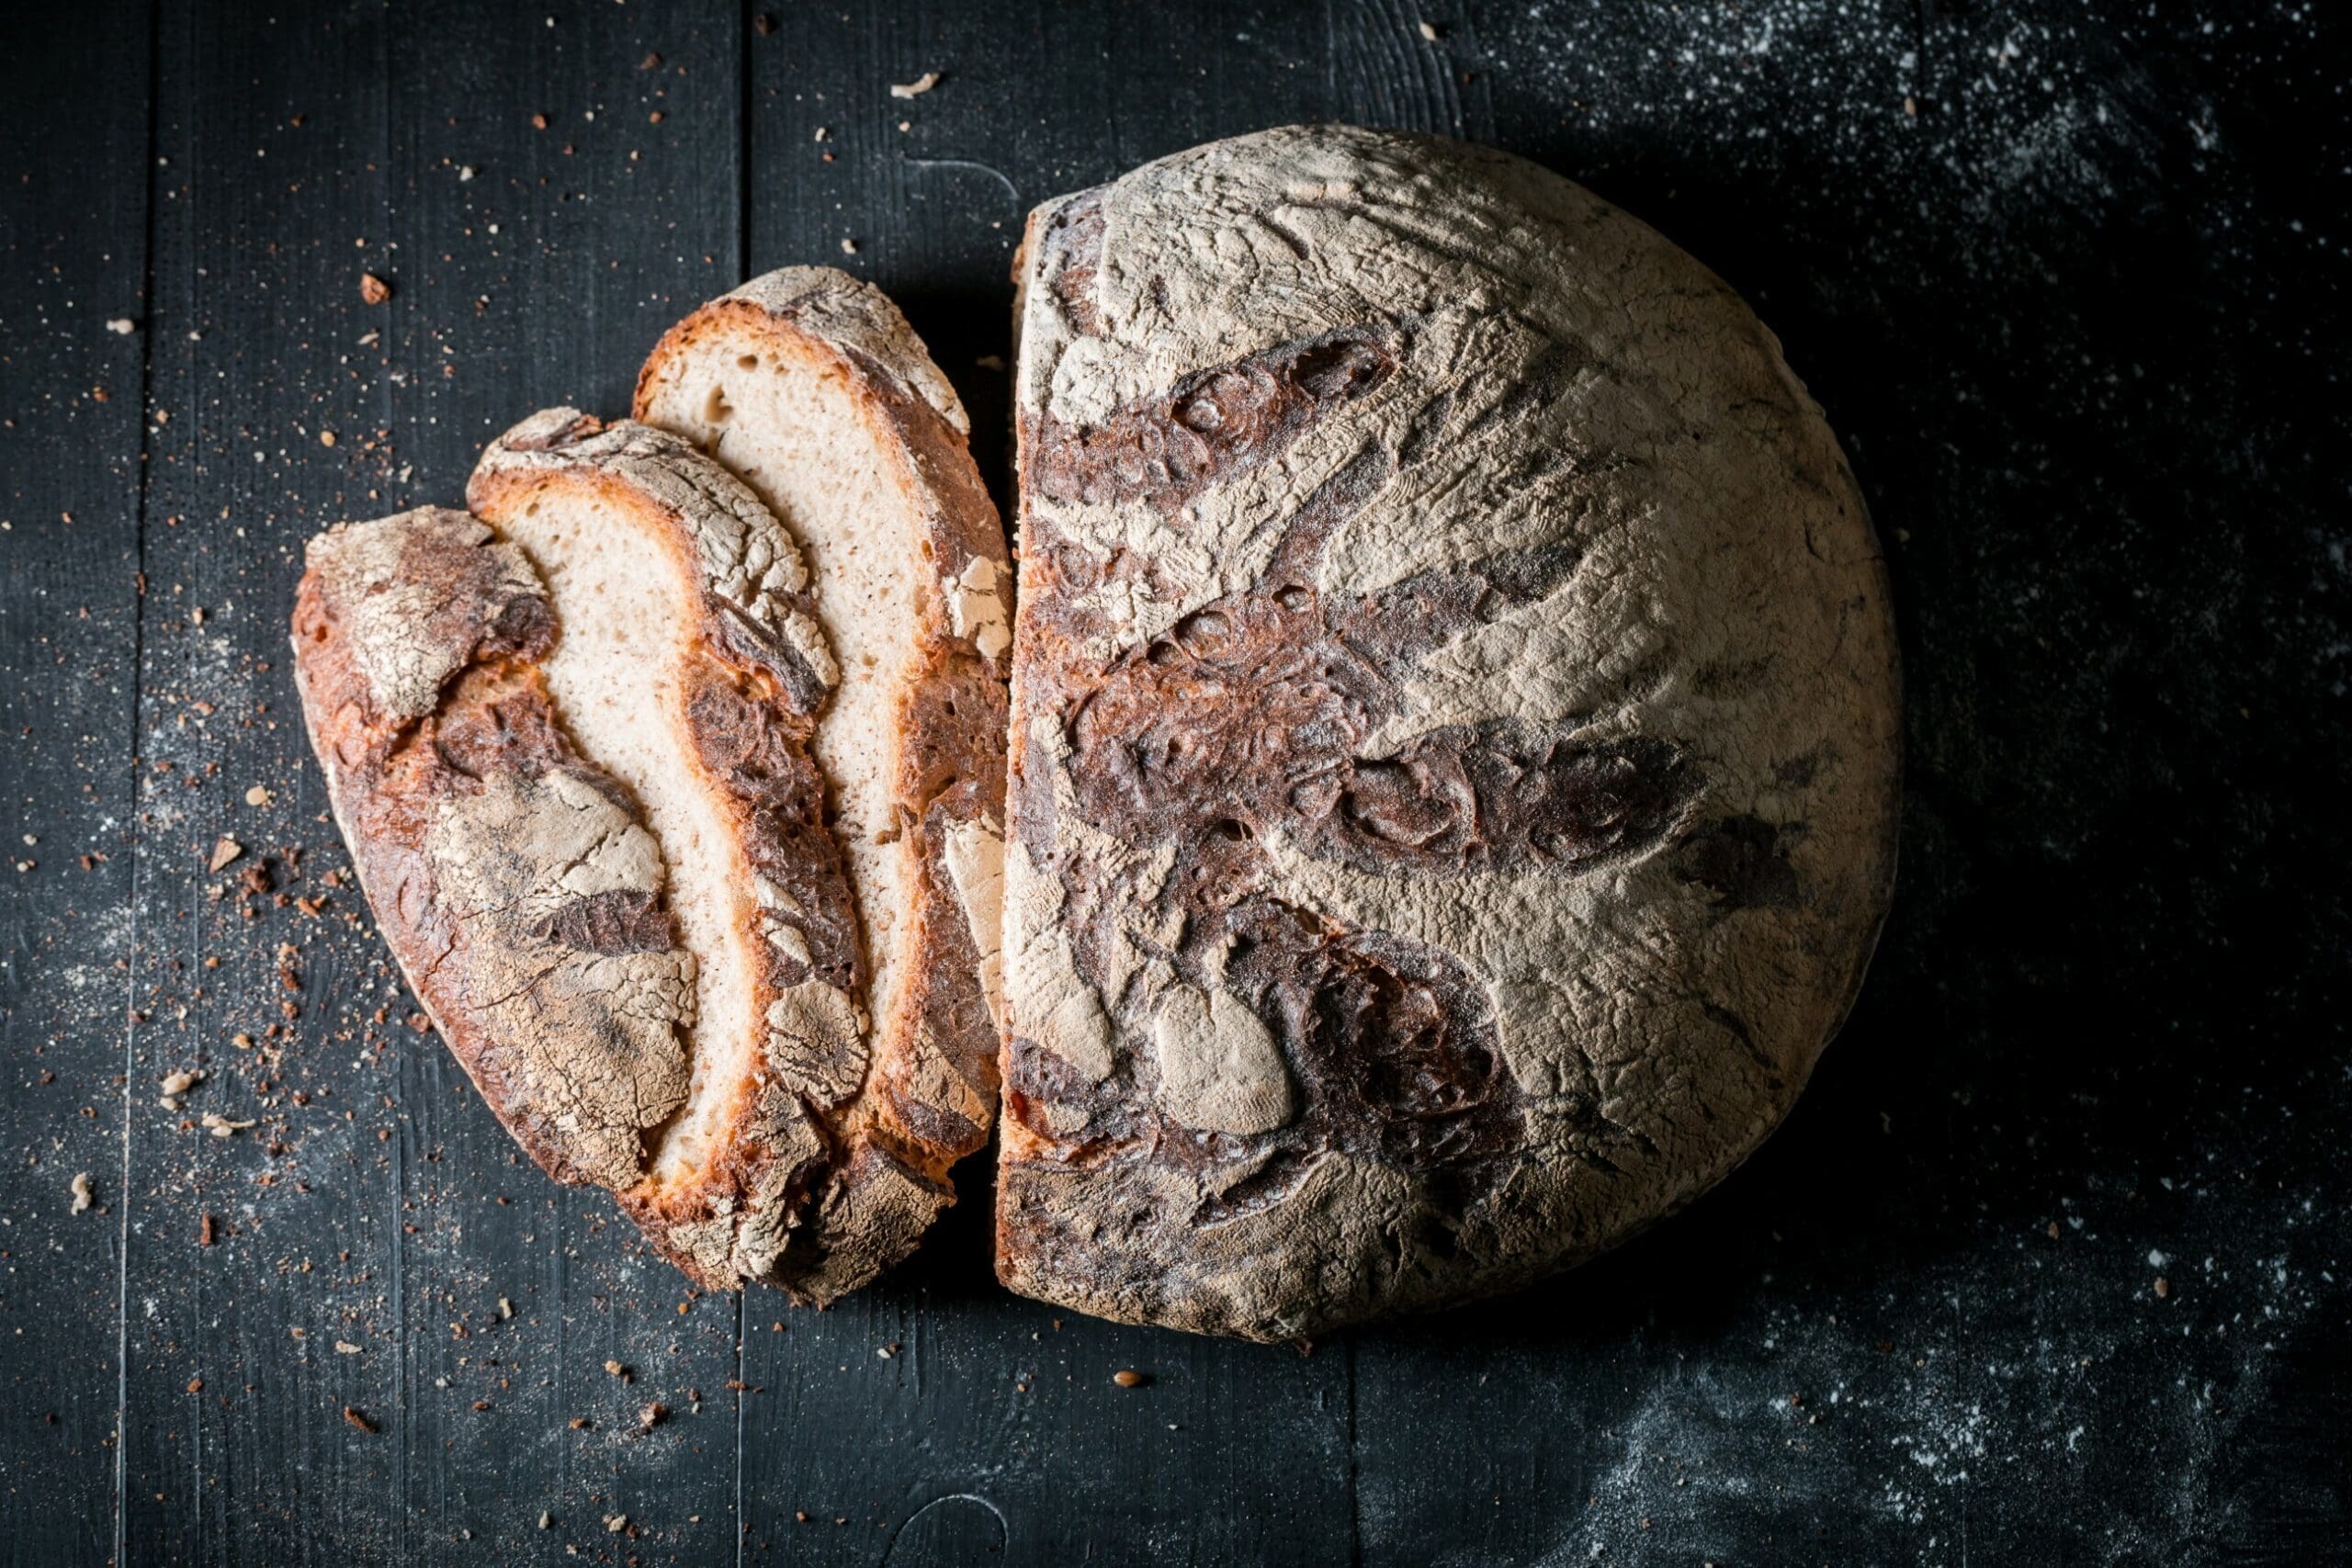 Should we reconsider bread in our diet?